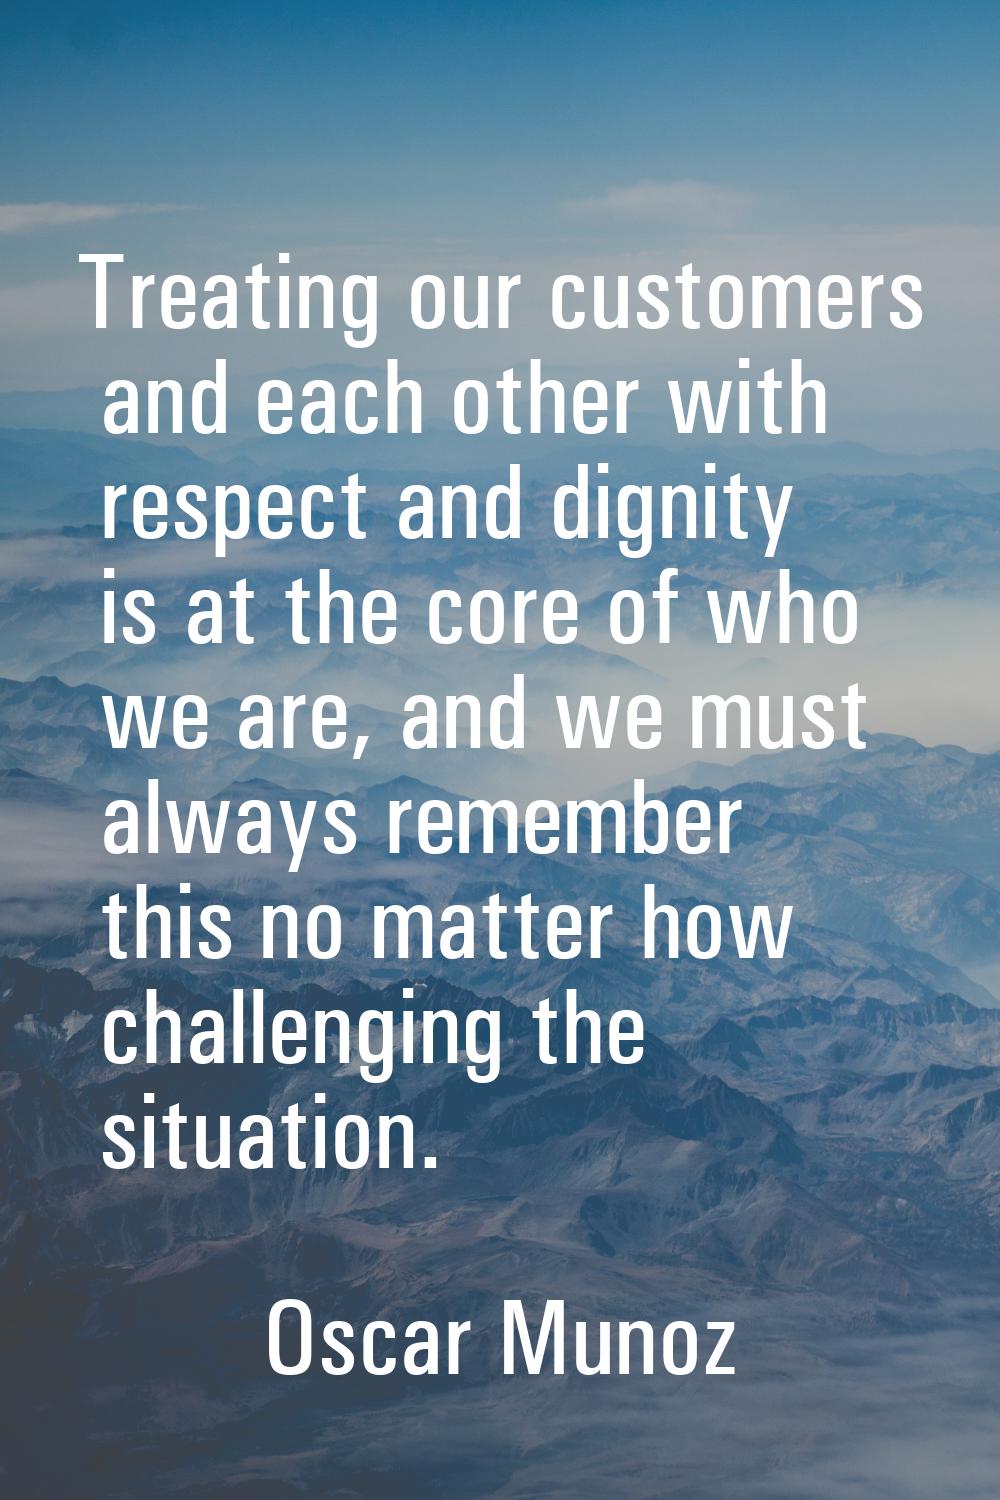 Treating our customers and each other with respect and dignity is at the core of who we are, and we